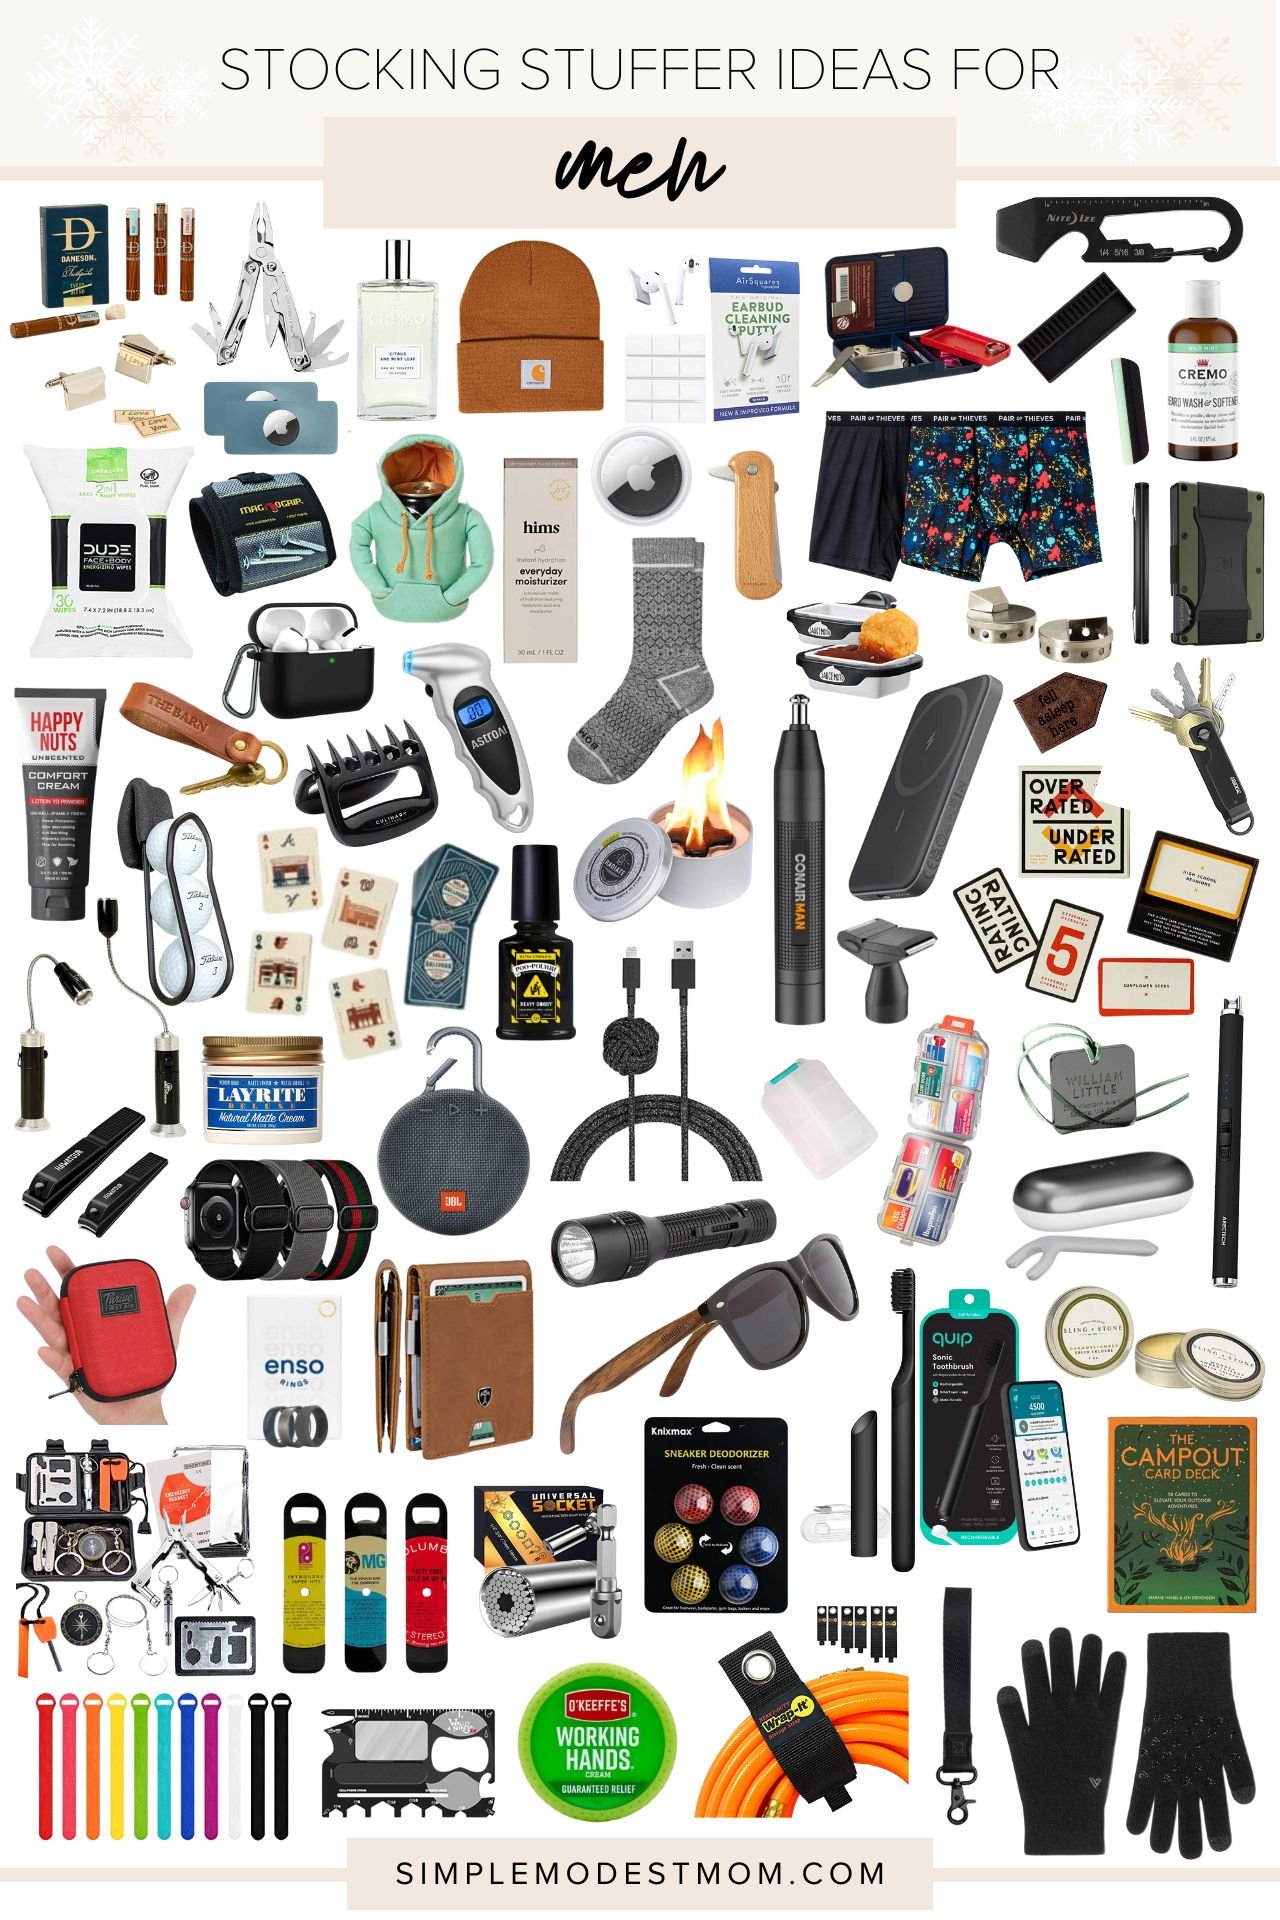 The Ultimate Stocking Stuffer Guide for Men: Ideas for Every Budget